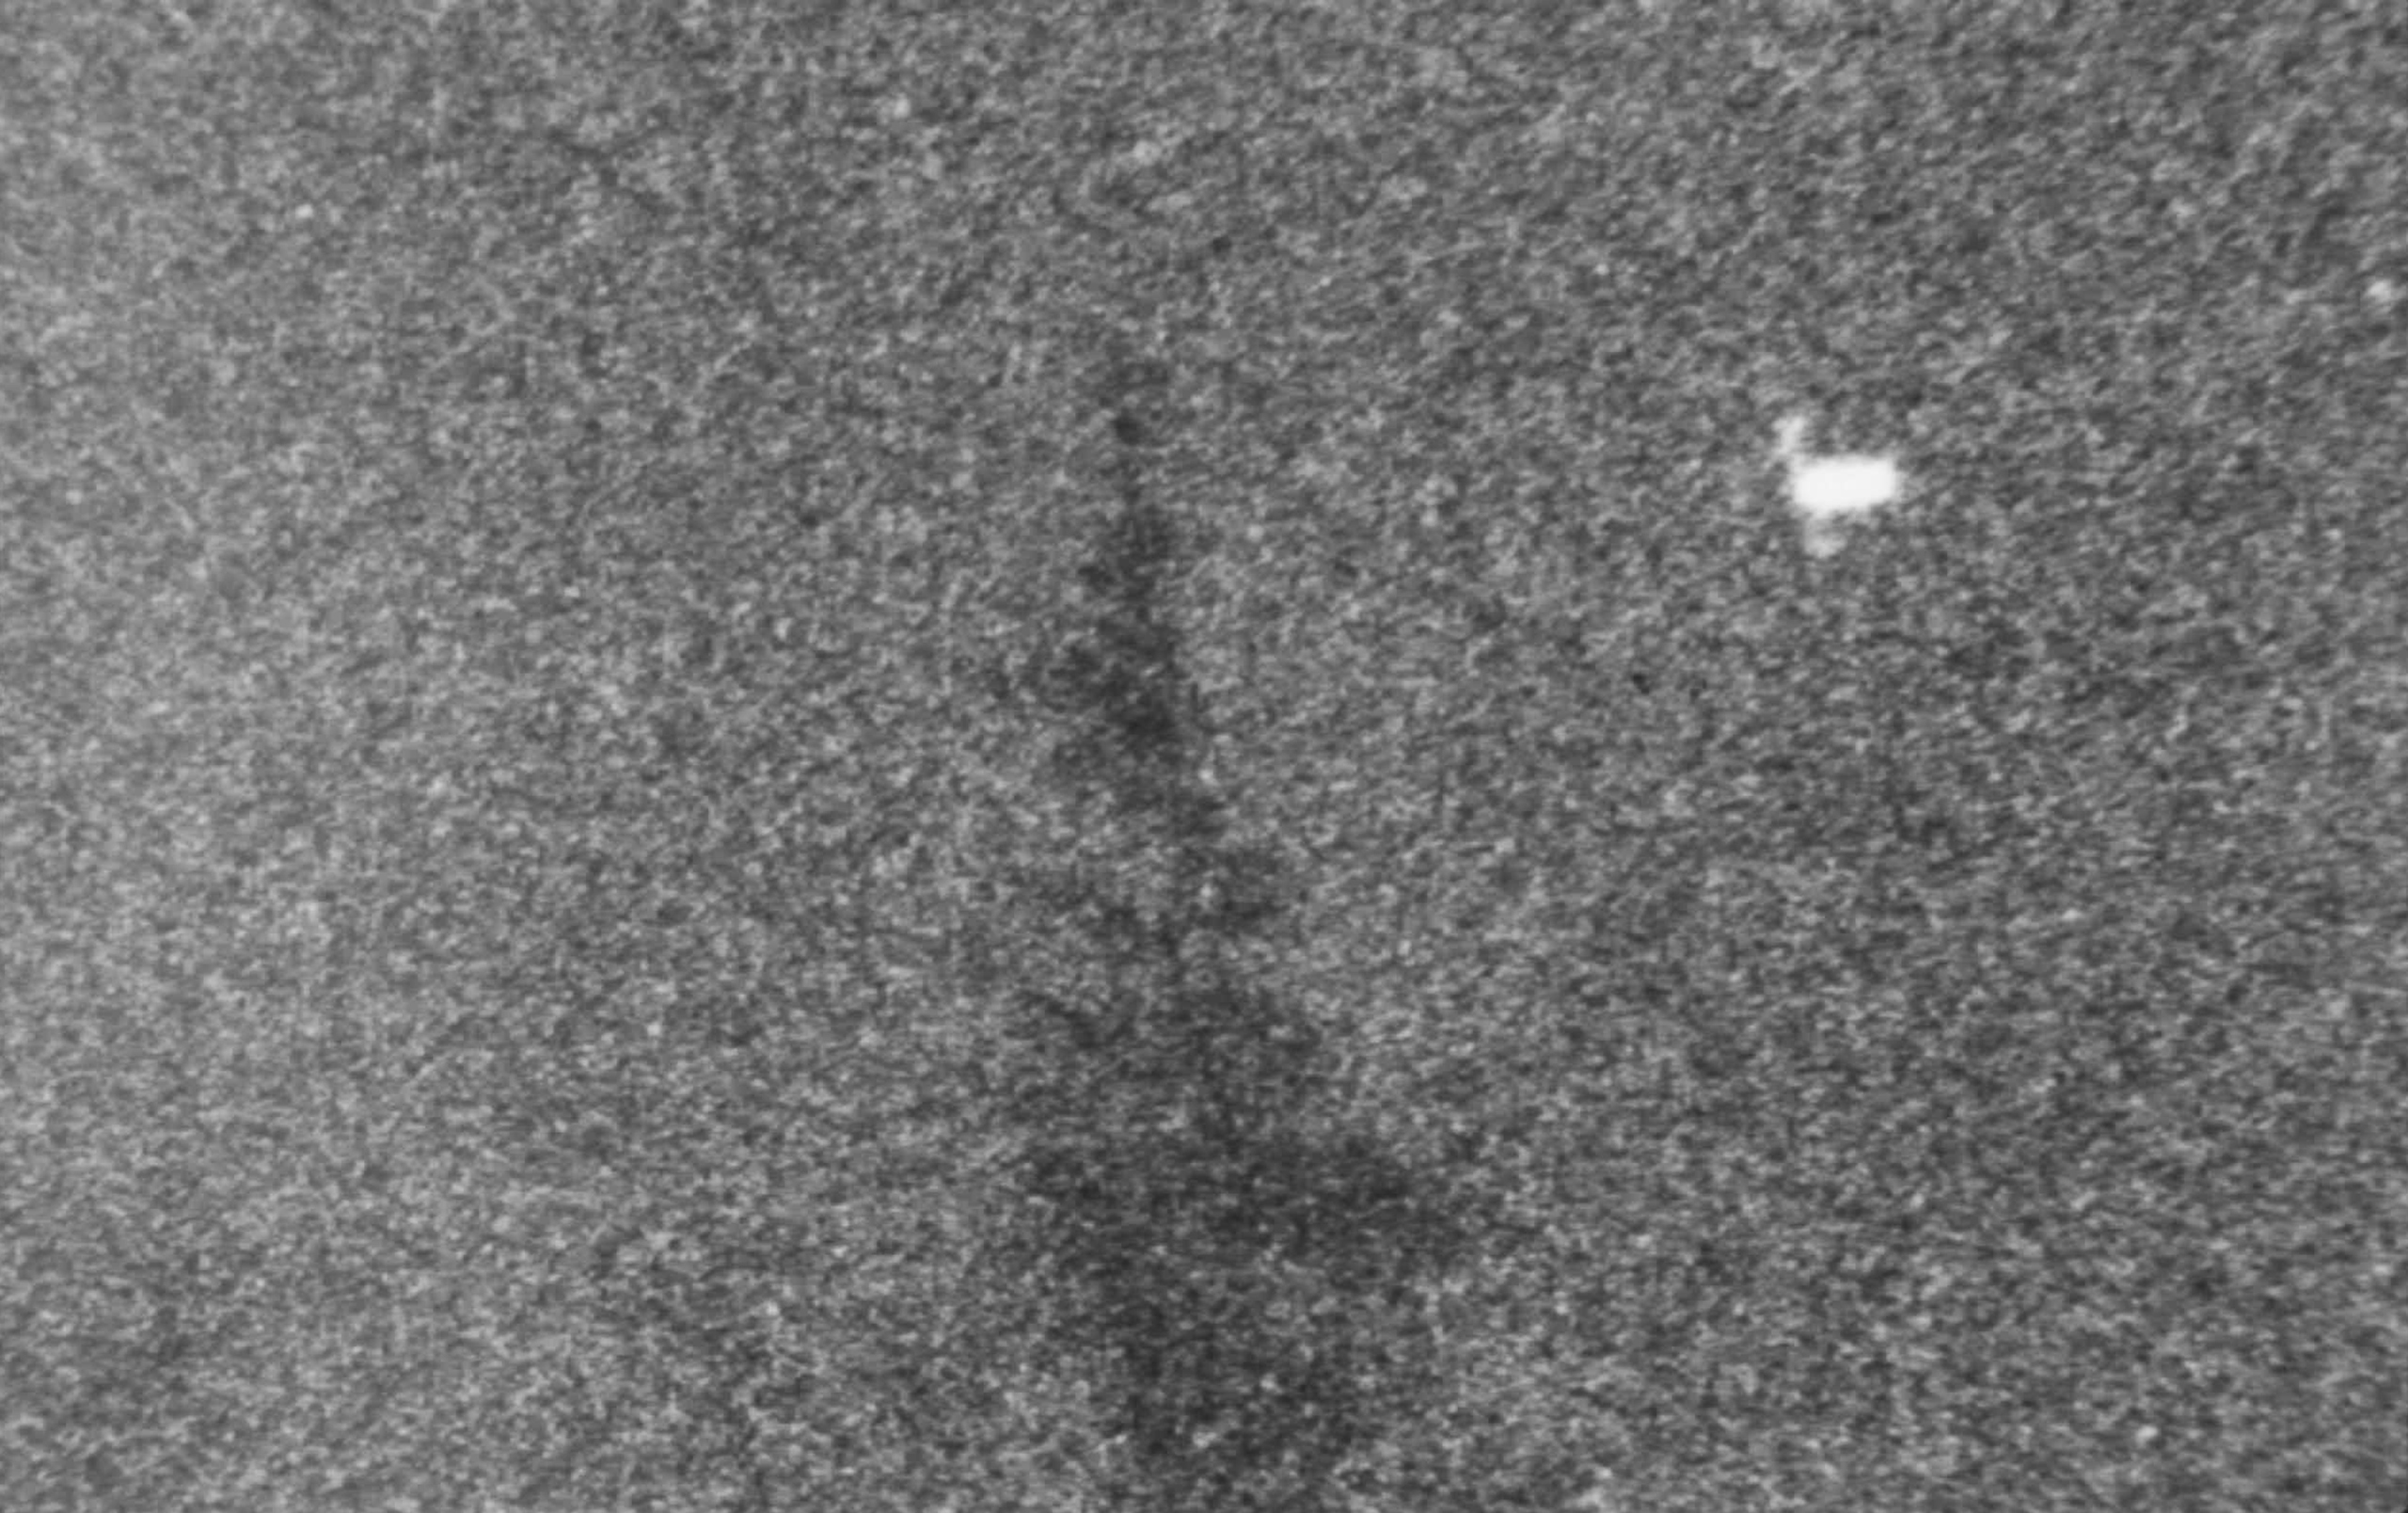 Archival image of the phenomenon taken by Roar Wister on, February 18, 1984, at 8:18pm.